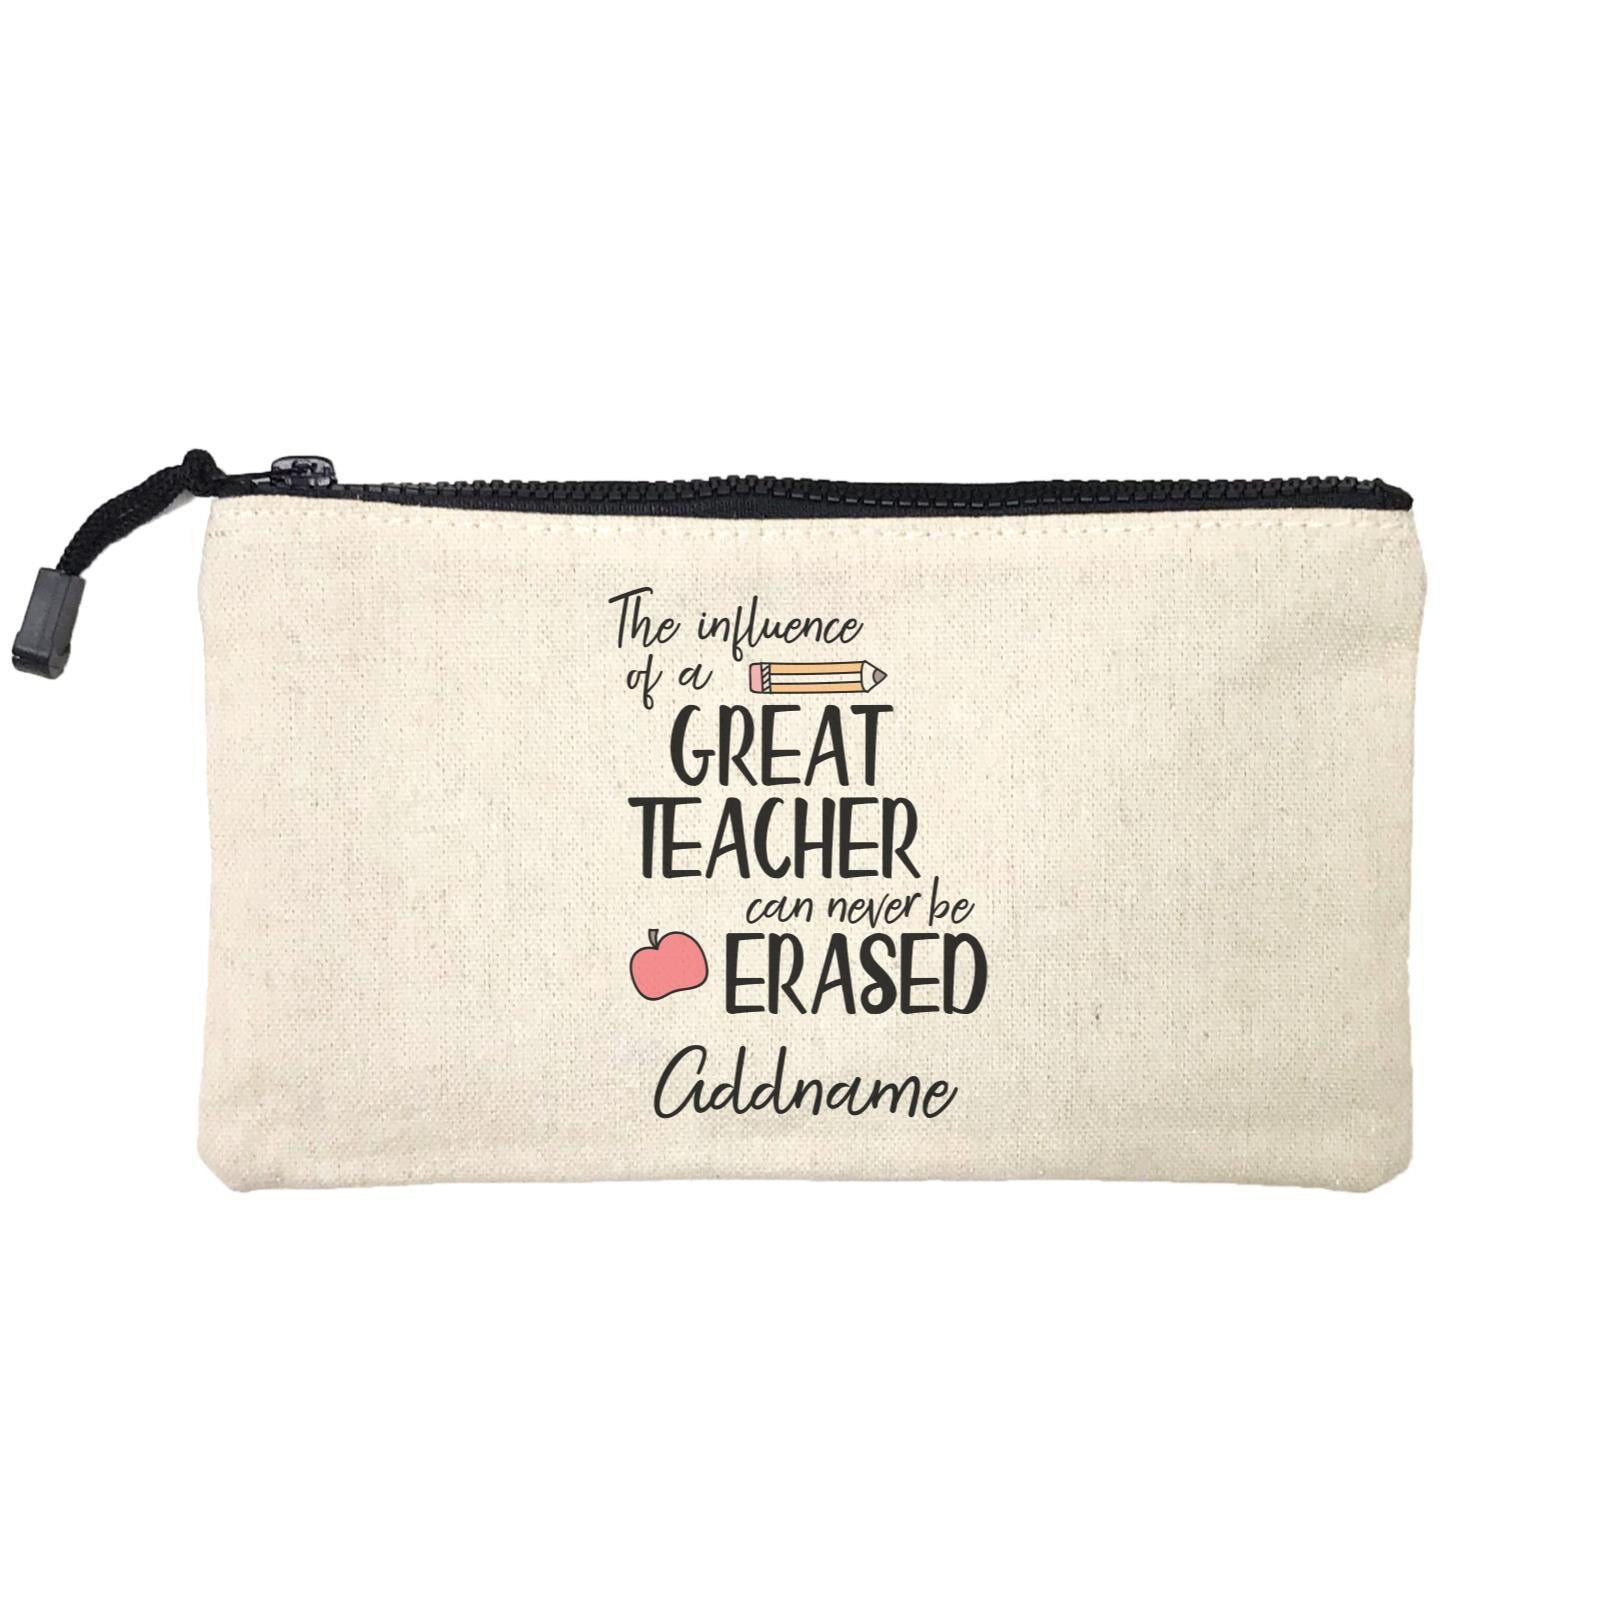 Teacher Quotes The Influence Of A Great Teacher Can Never Be Erased Addname Mini Accessories Stationery Pouch